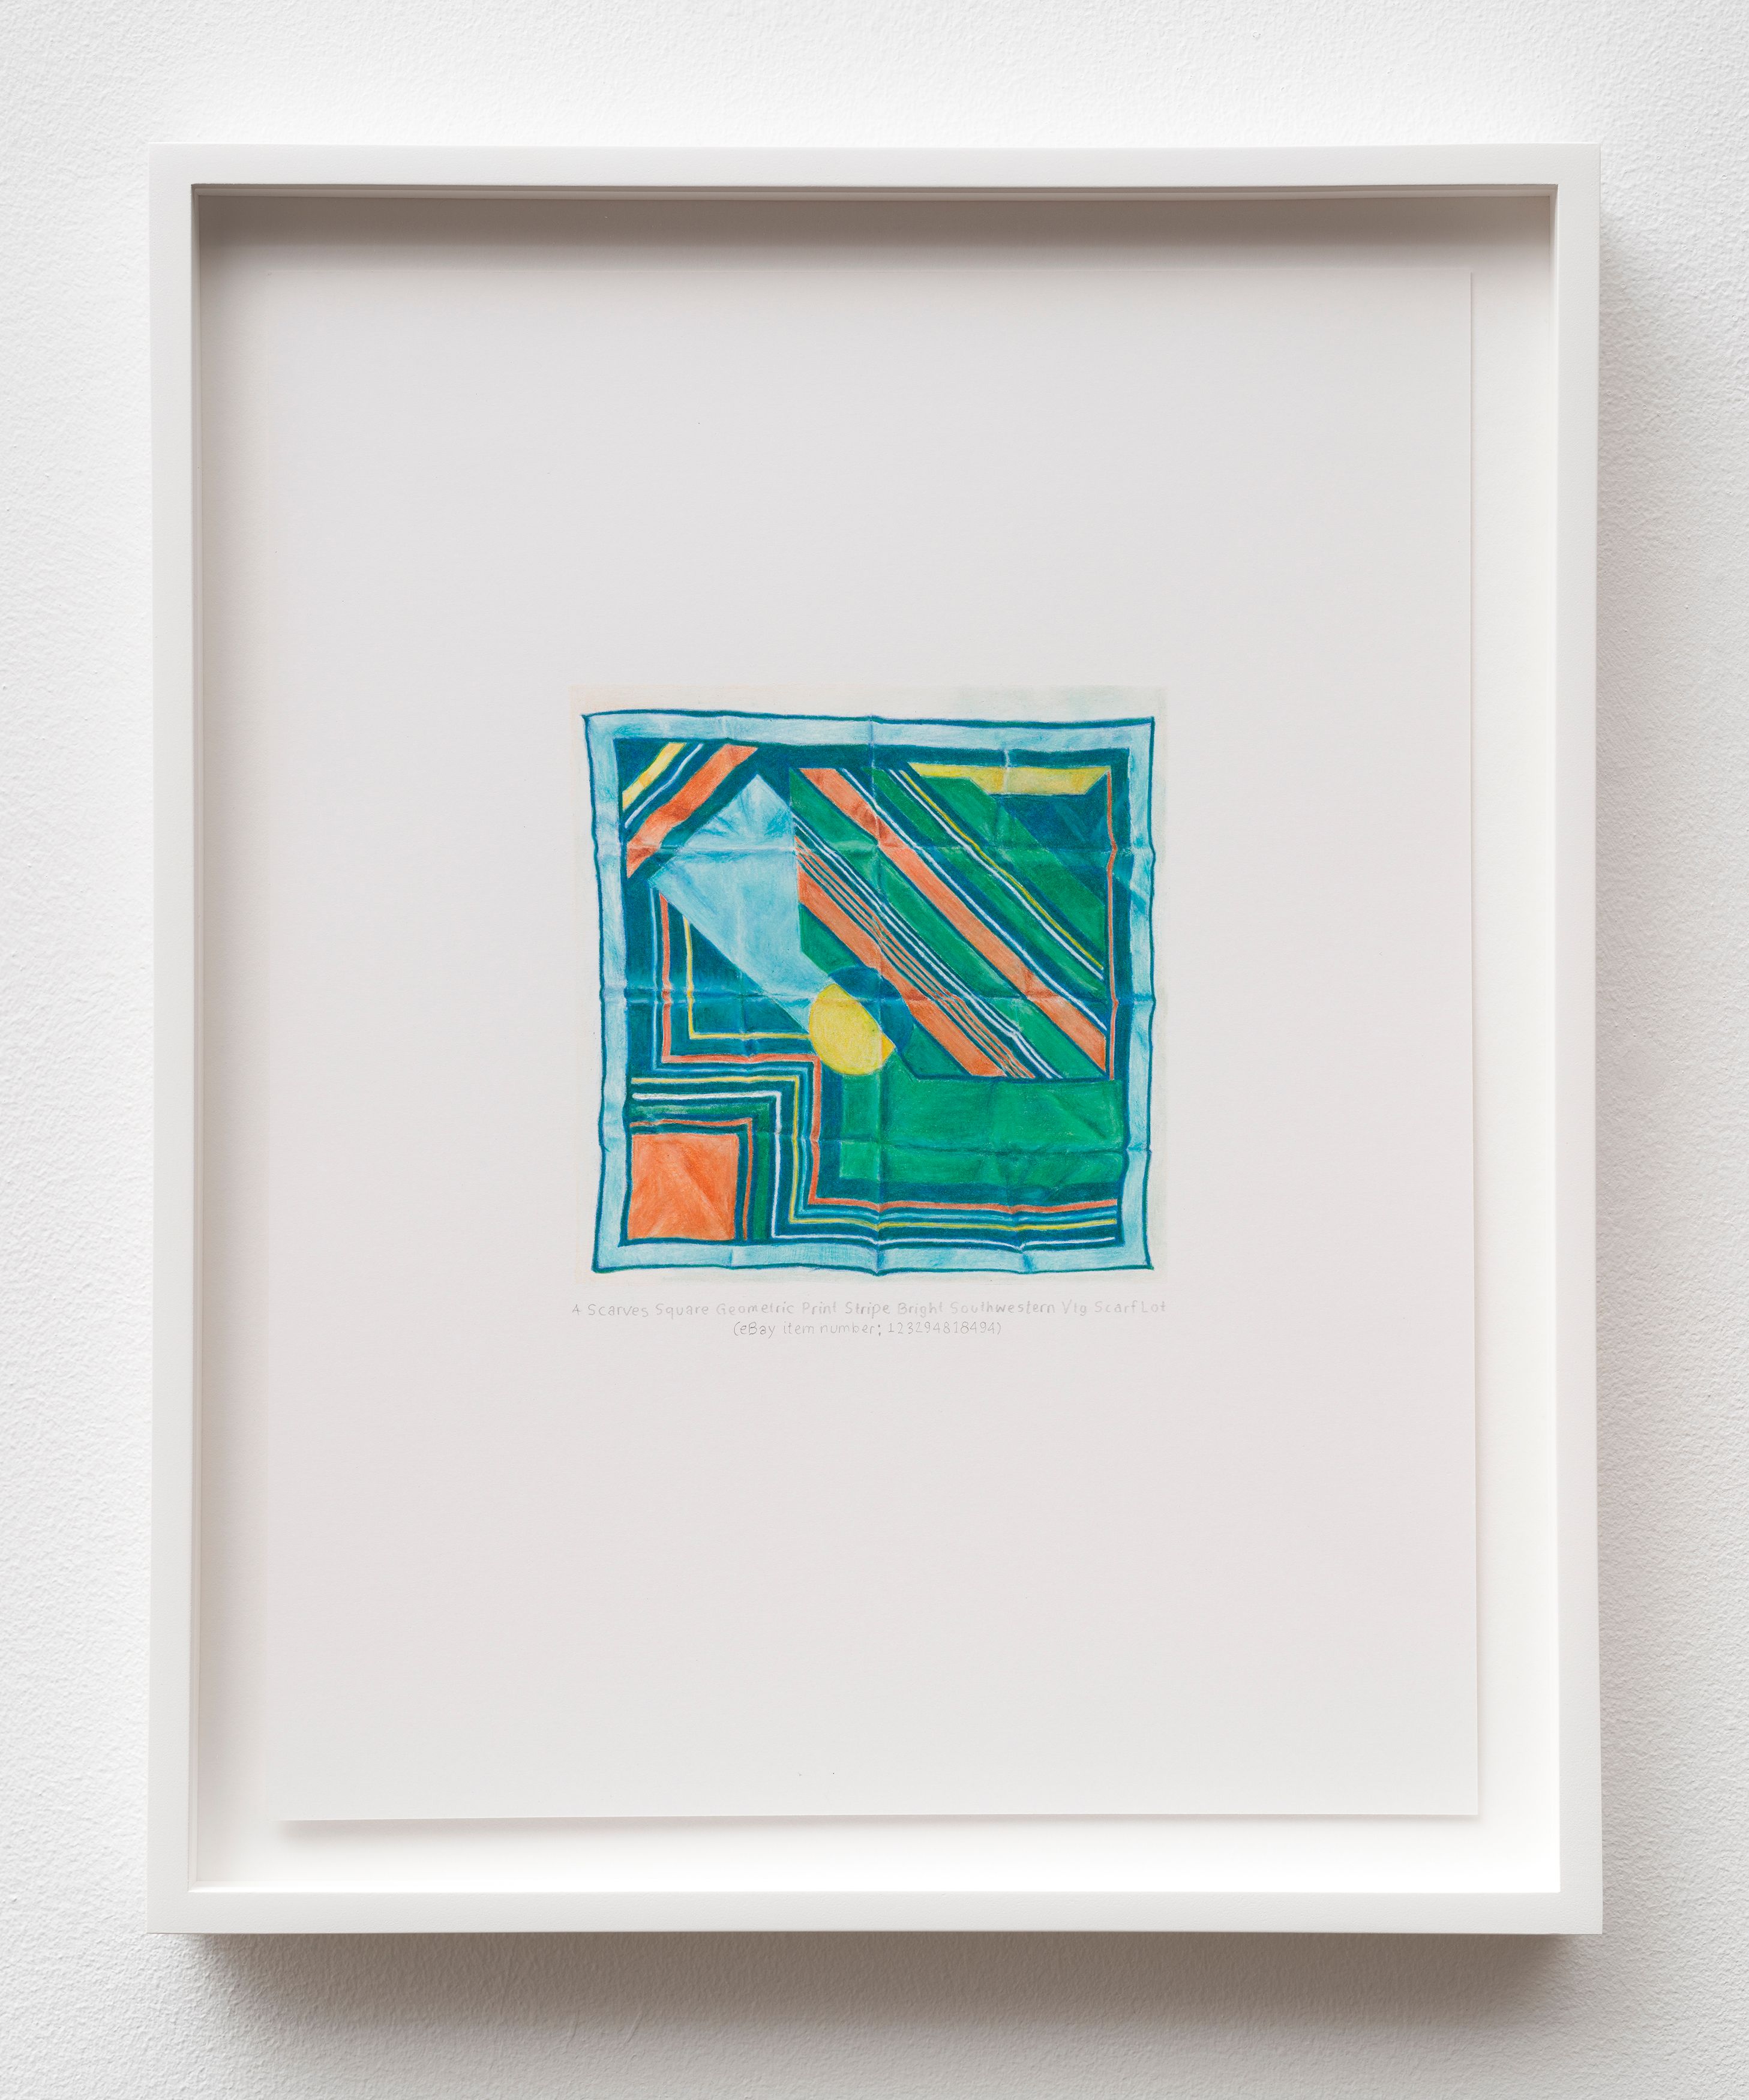 Barb Choit, Ebay Item Number 123294818494, 2018, colored pencil on bristol paper, 11 x 14 in. (27.94 x 35.56 cm). Part of series: 100 Lot Contemporary Handmade Art Drawings NEW Wall Art Home Decor Work on Paper